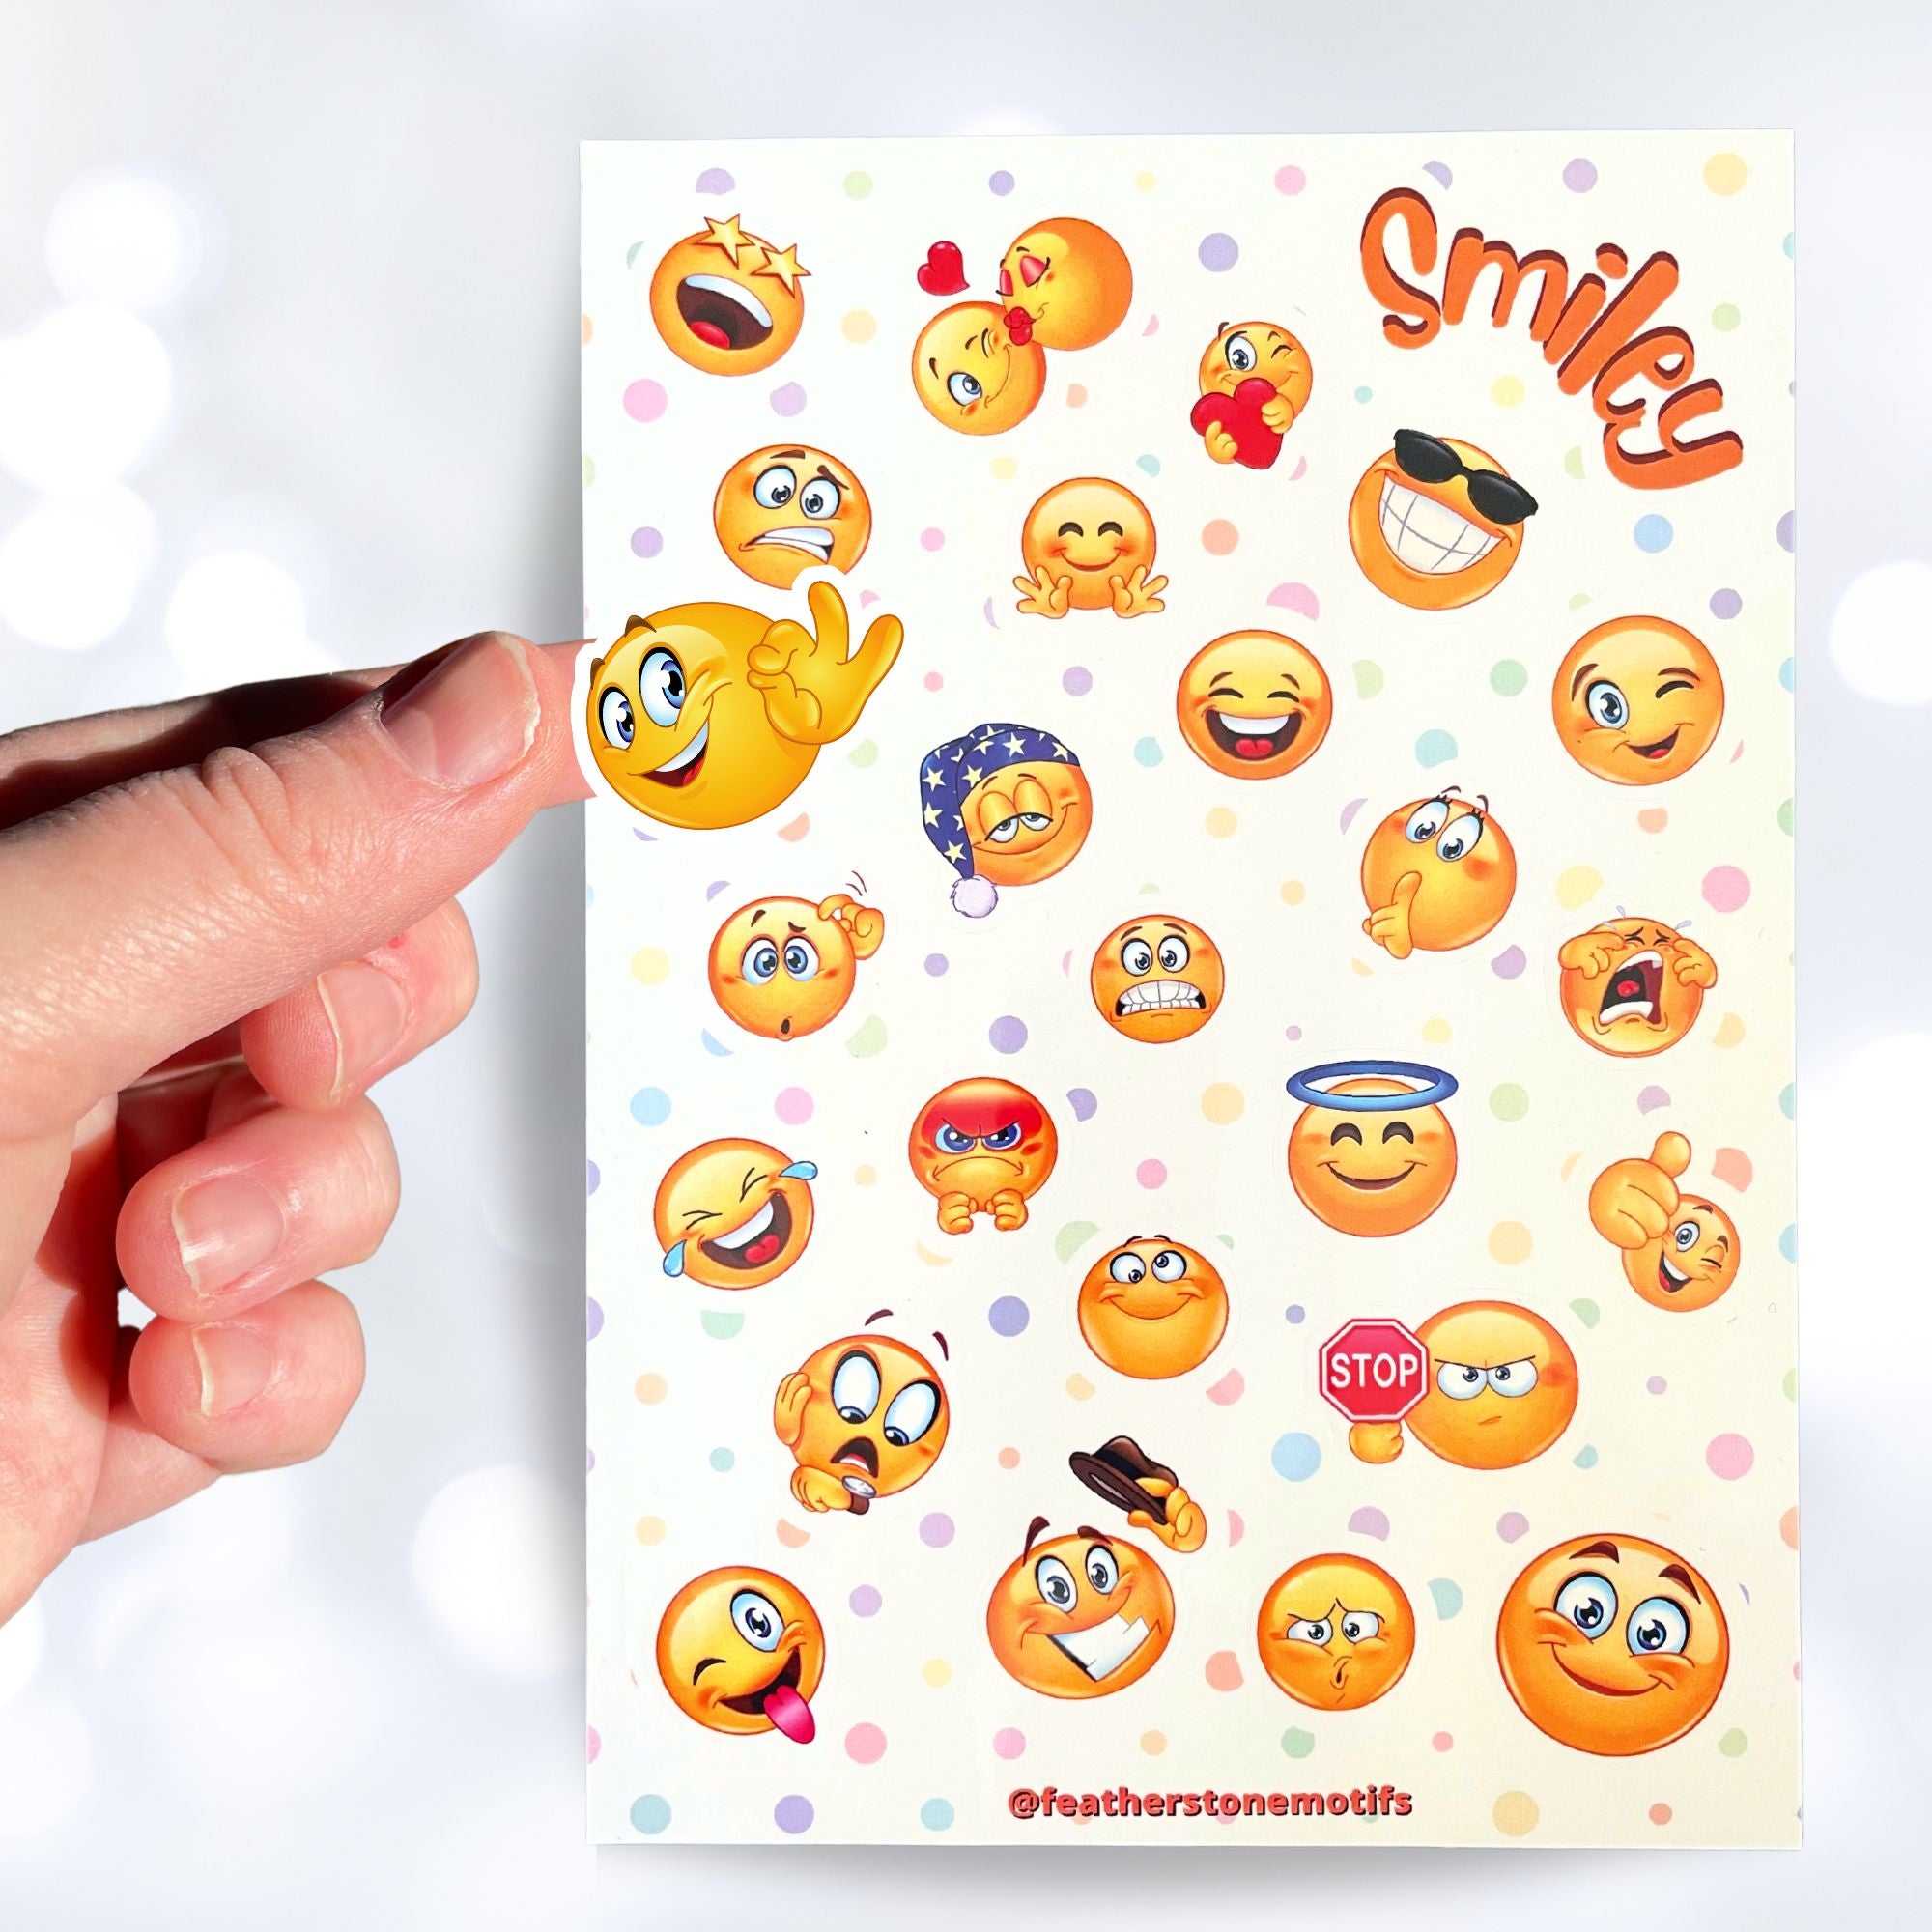 This sticker sheet features all your favorite smiley emojis! It's enough to make anyone smile! This image shows a hand holding a smiley face sticker above the sticker sheet.